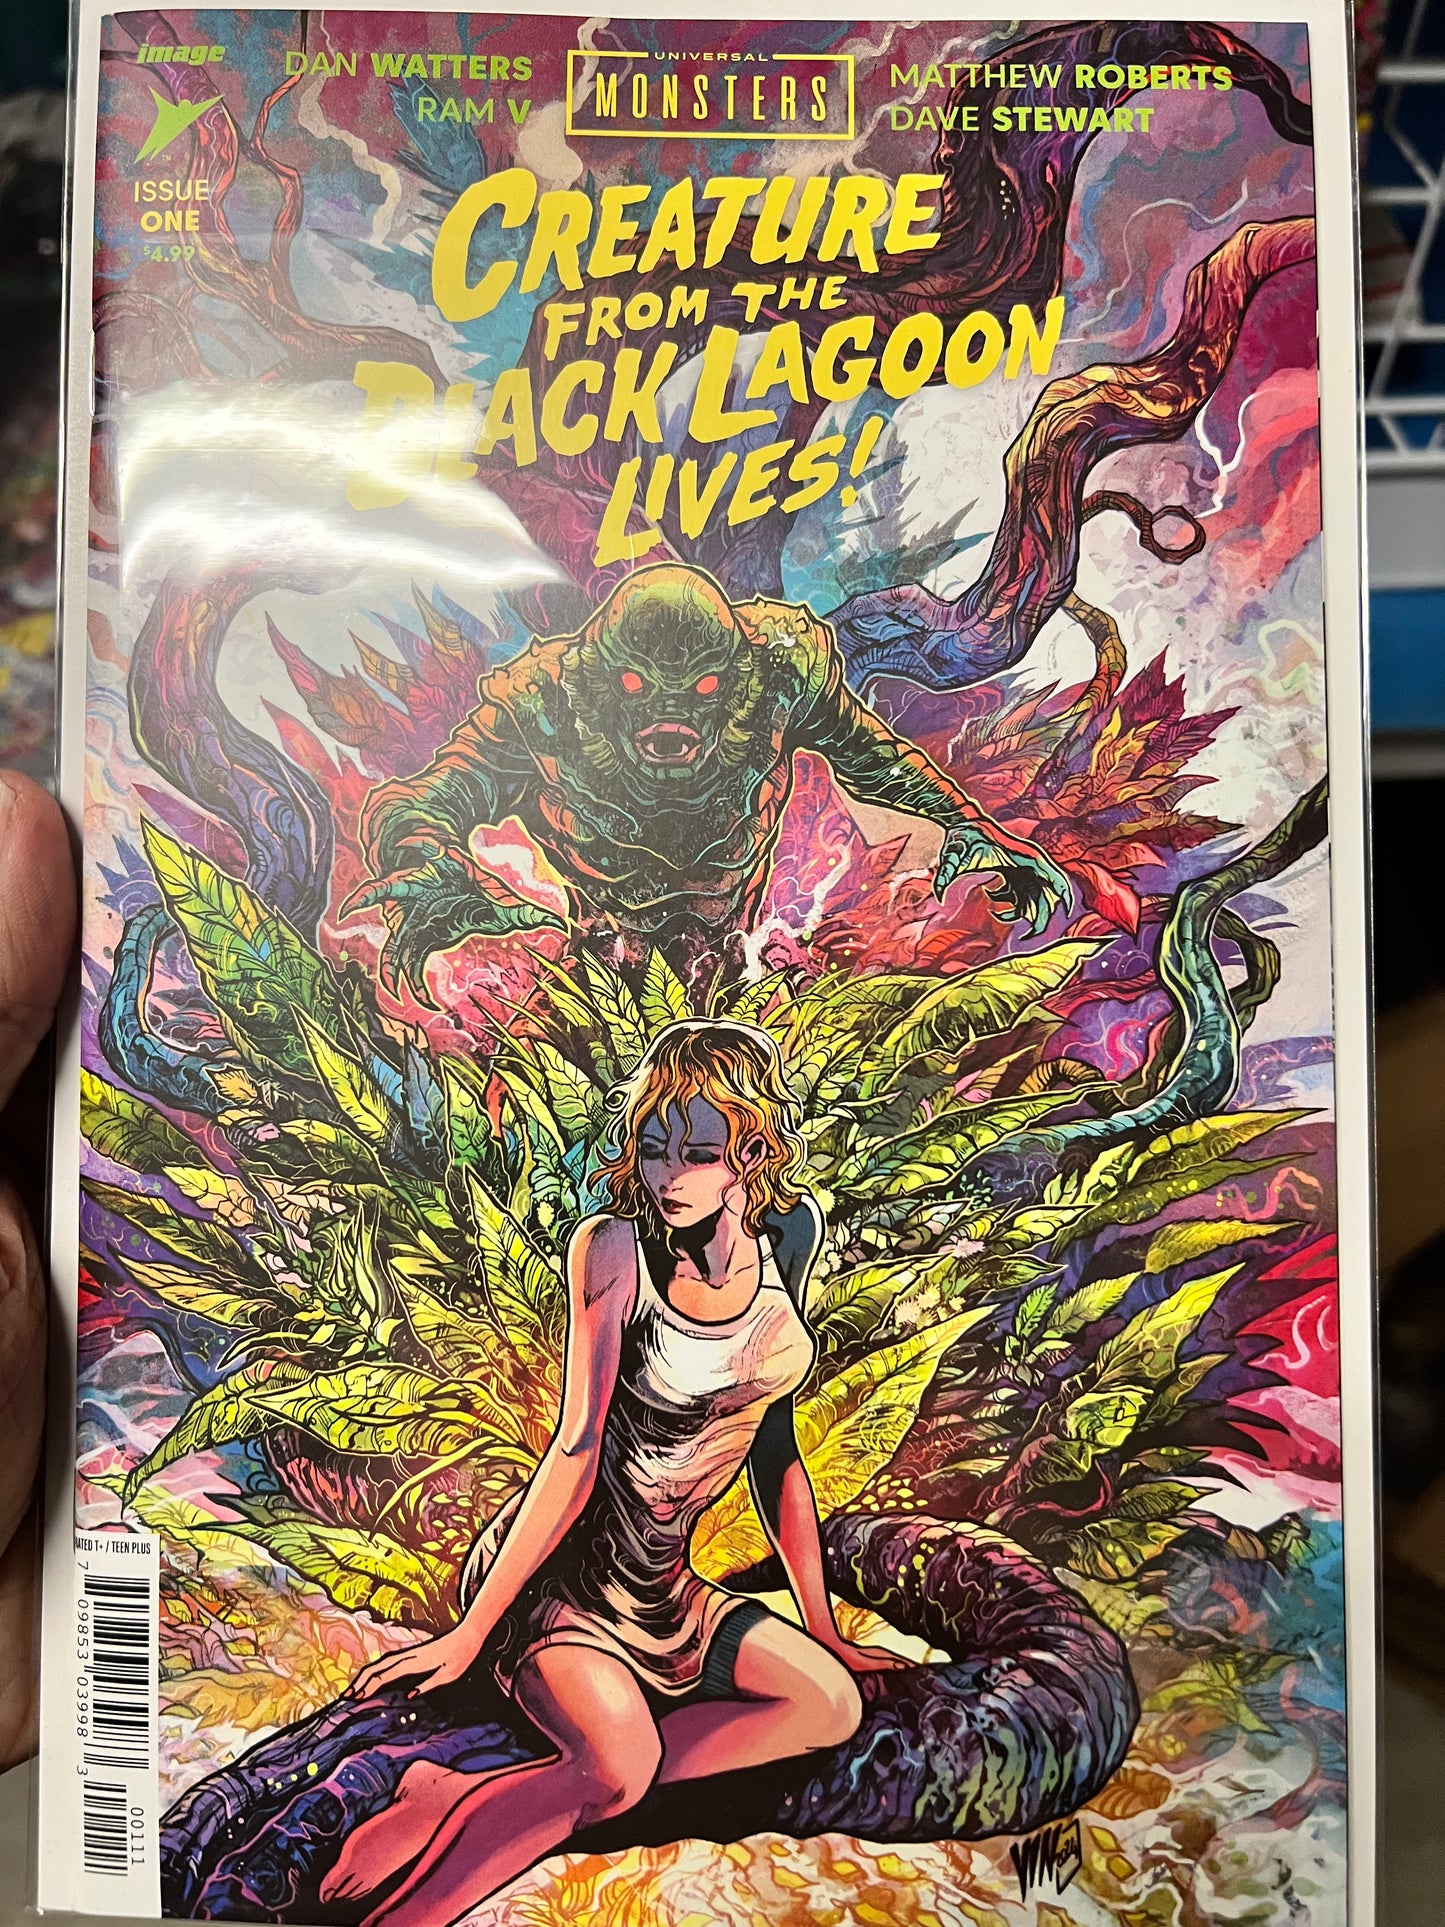 Creature from the Black Lagoon Lives # 1  8 - Cover Bundle + FREE Exclusive